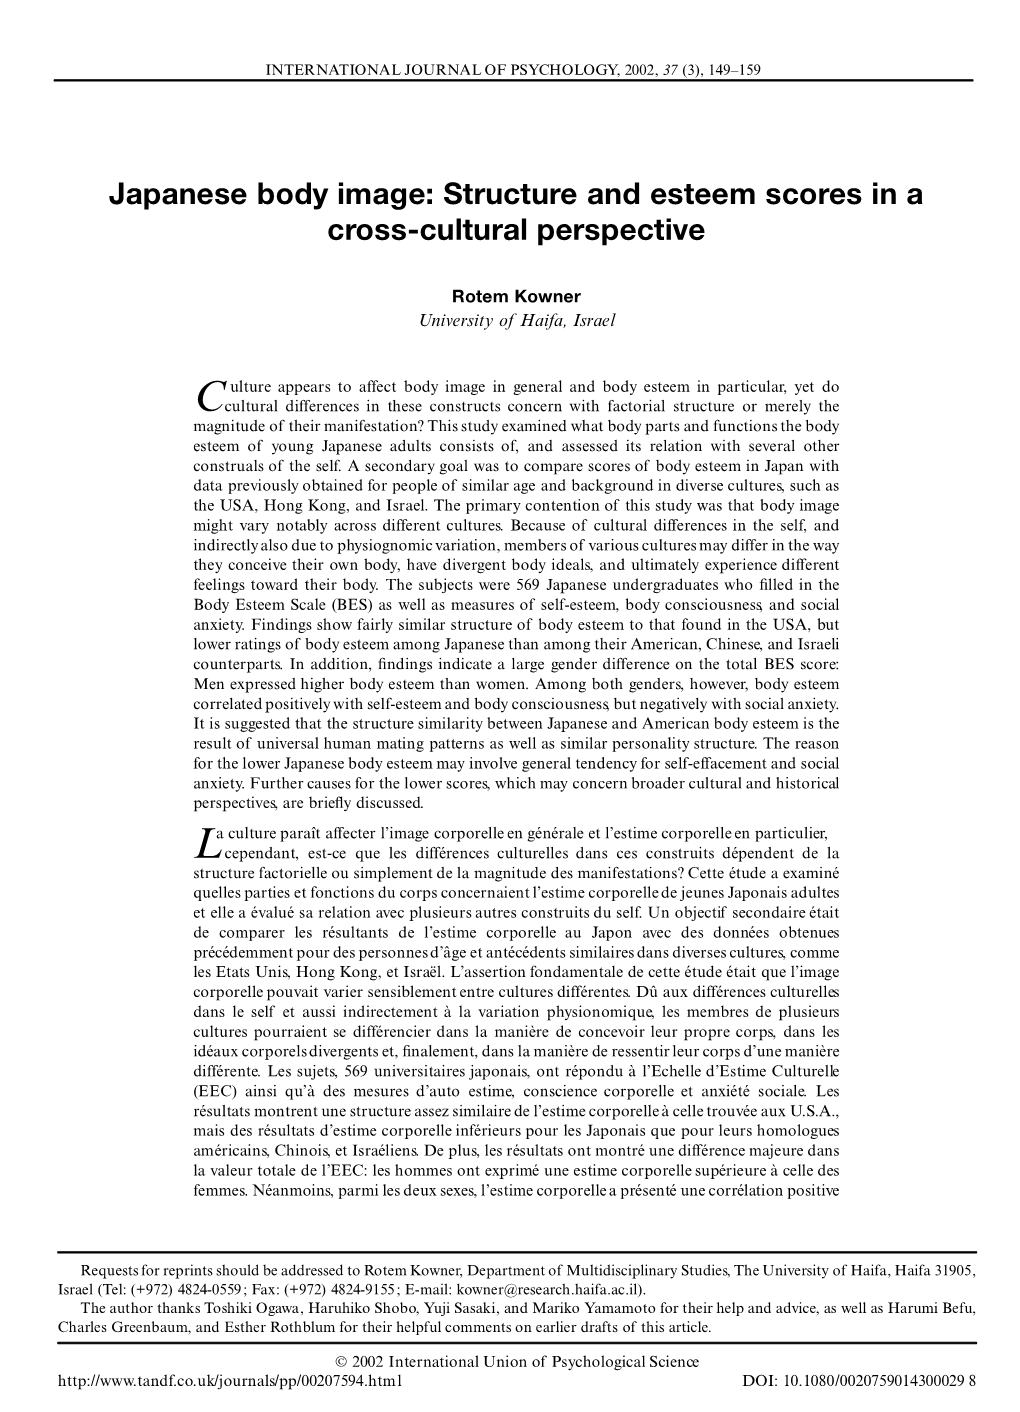 Japanese Body Image: Structure and Esteem Scores in a Cross-Cultural Perspective